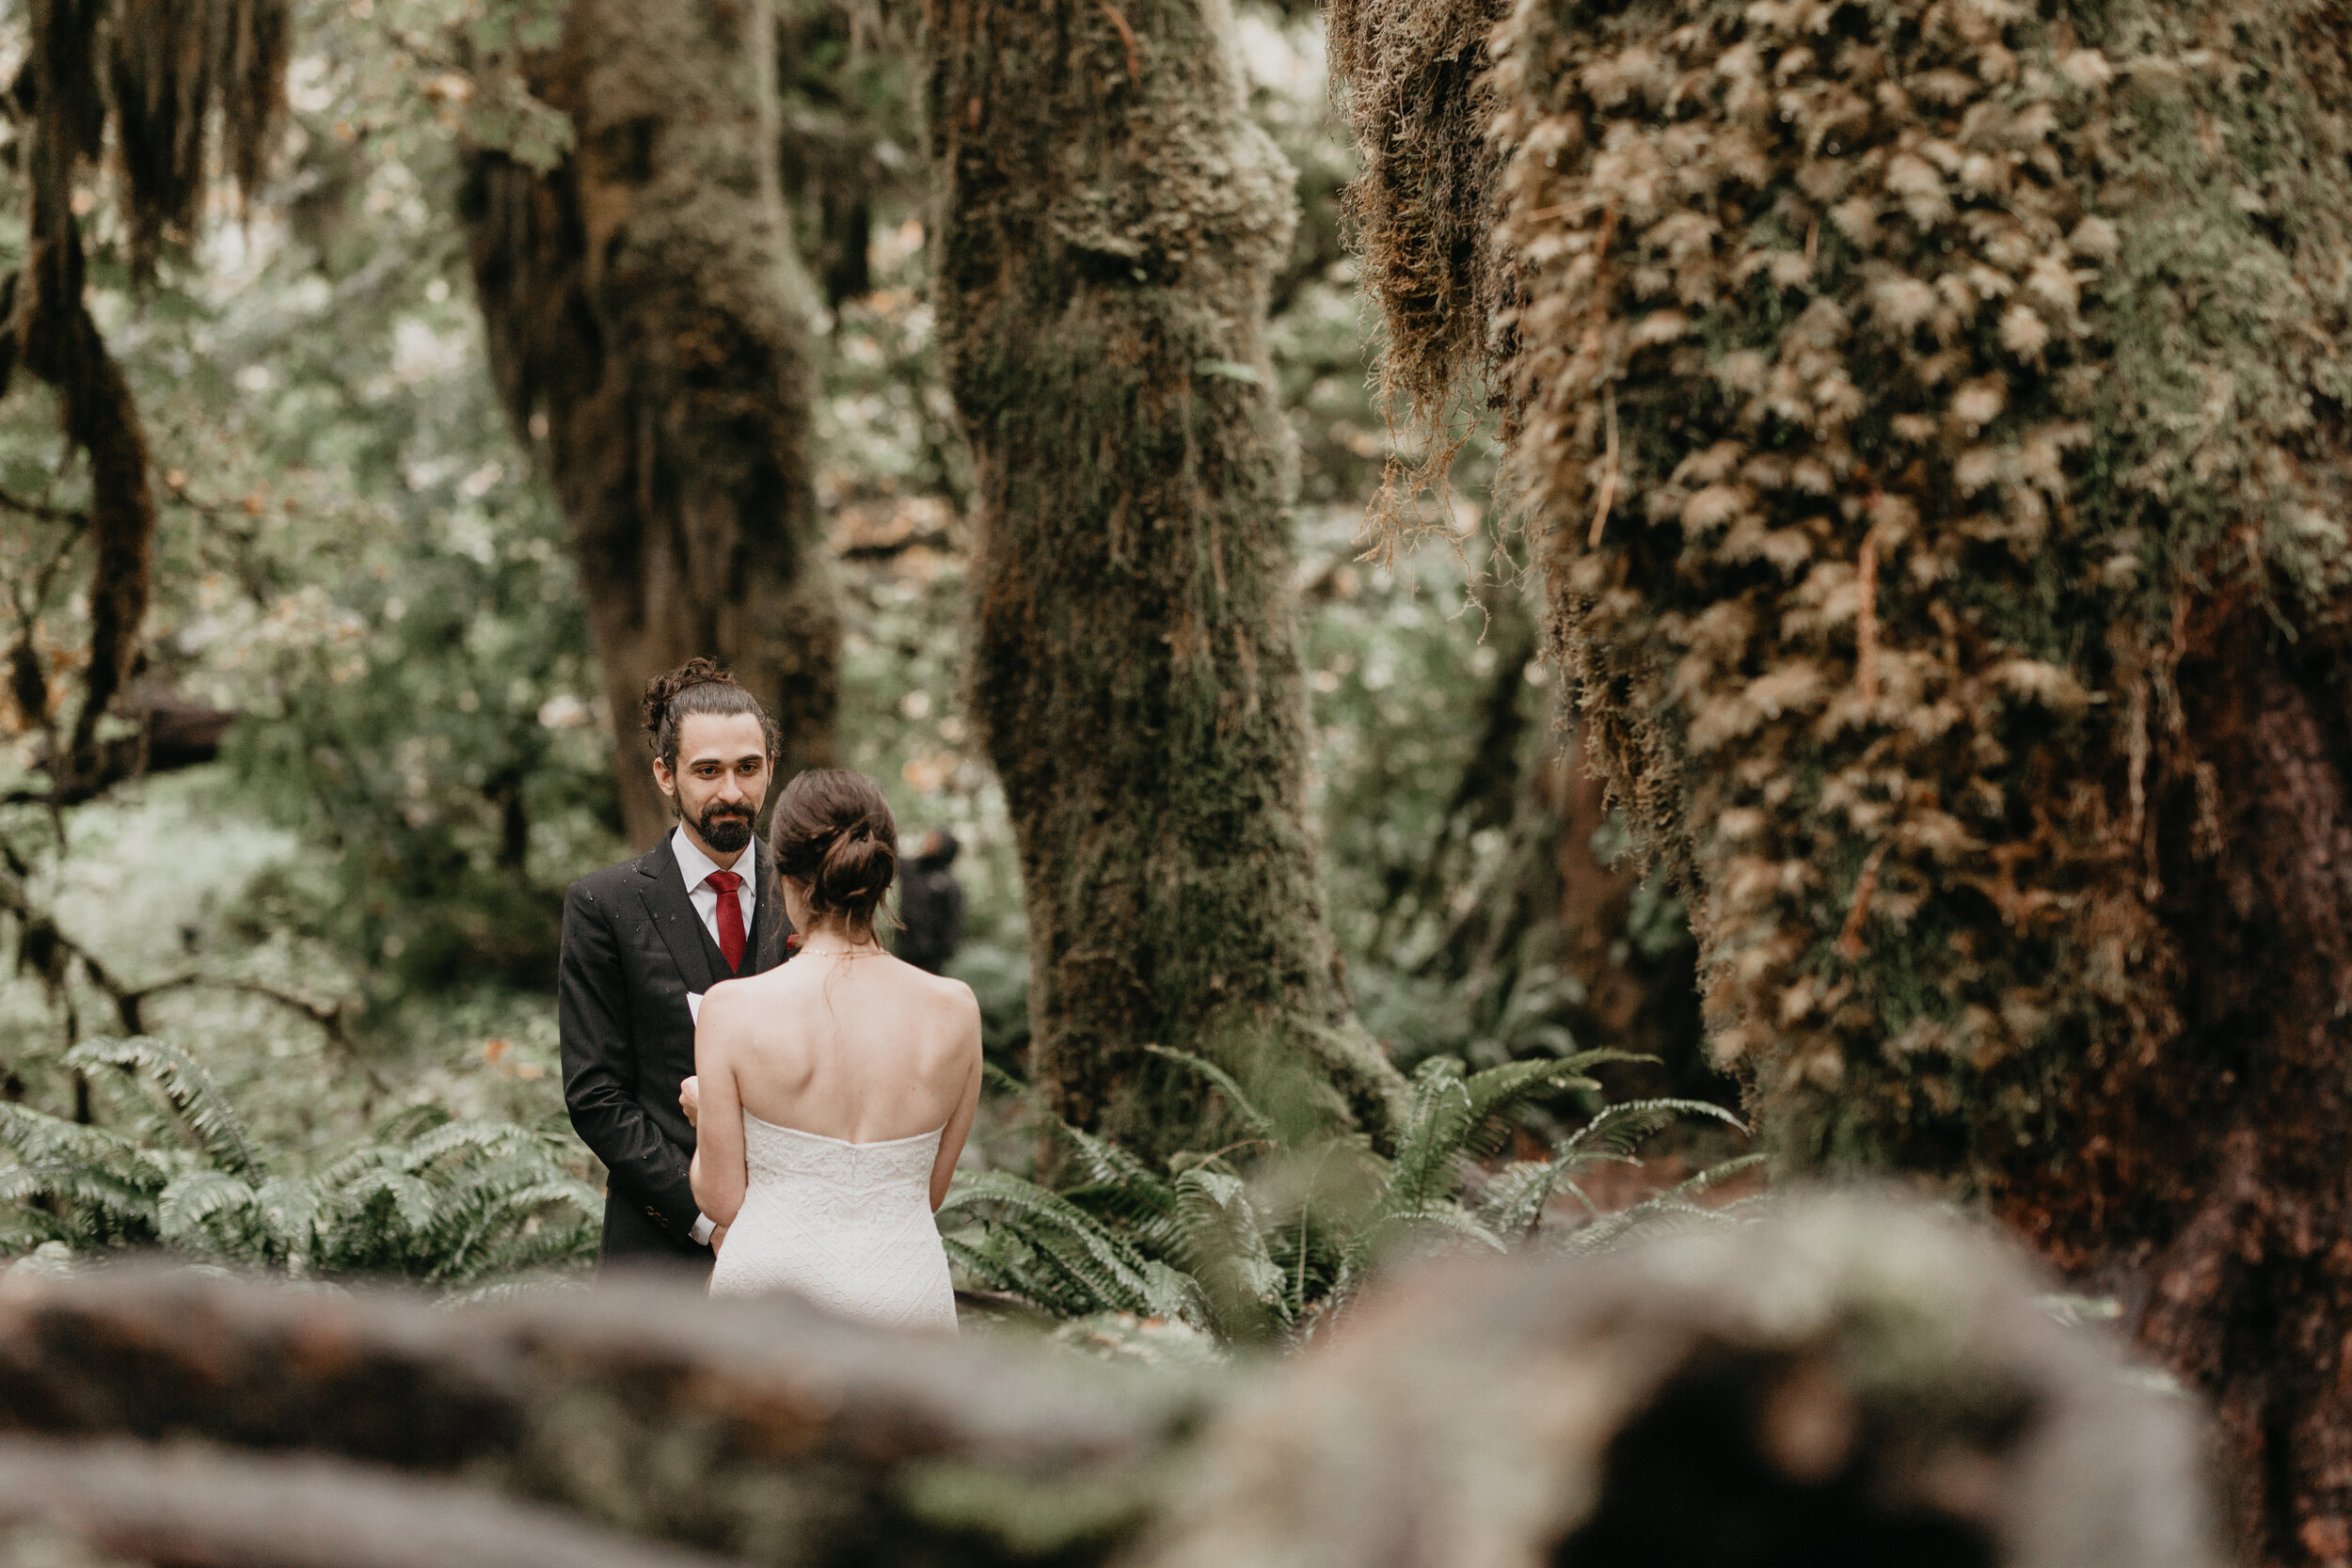 Nicole-Daacke-Photography-Olympic-national-park-elopement-photography-intimiate-elopement-in-olympic-peninsula-washington-state-rainy-day-ruby-beach-hoh-rainforest-elopement-inspiration-rainforest-pnw-elopement-photography-118.jpg